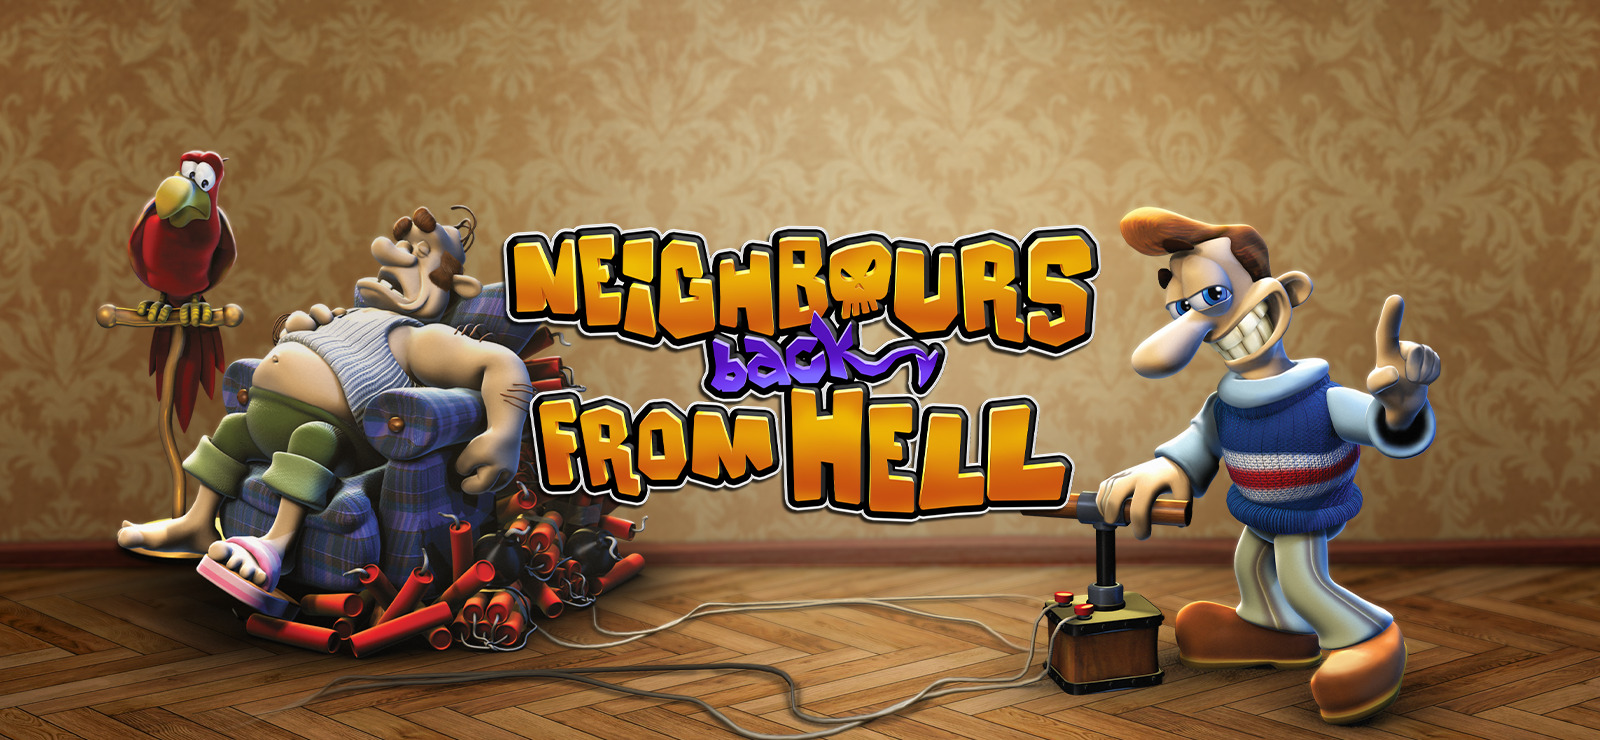 neighbours from hell 3 full